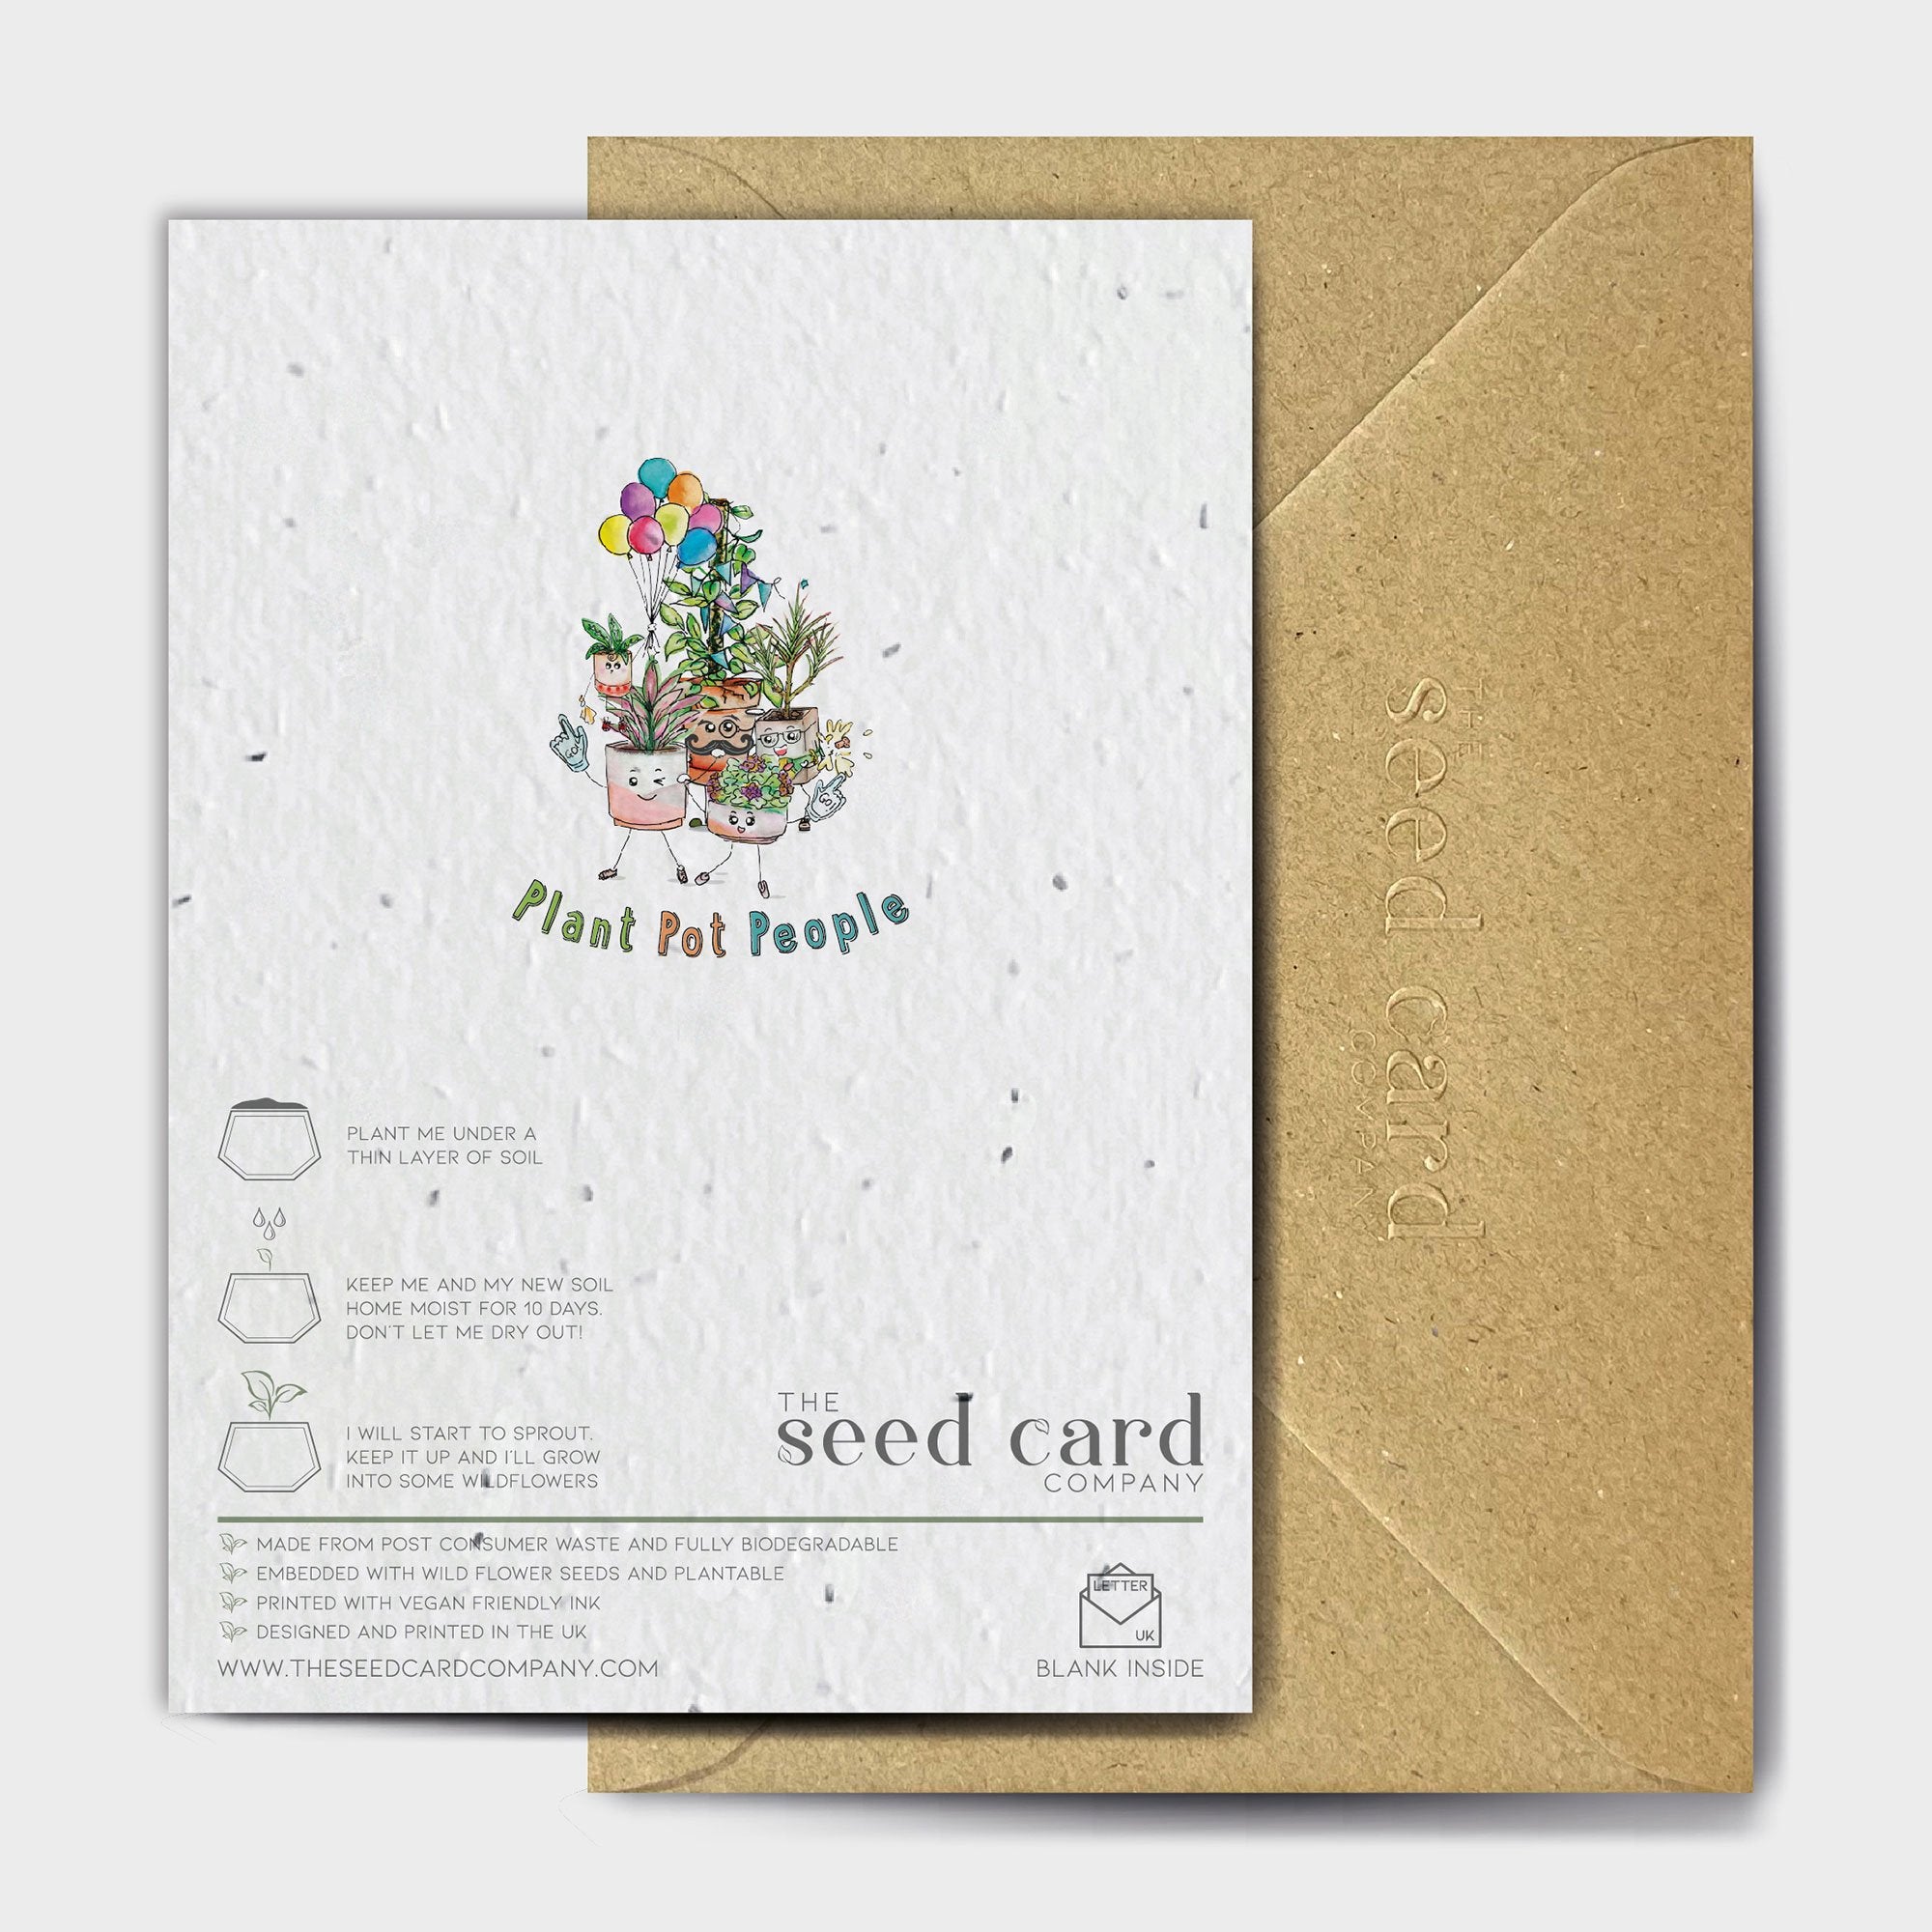 Shop online Y'Orchid - 100% biodegradable seed-embedded cards Shop -The Seed Card Company